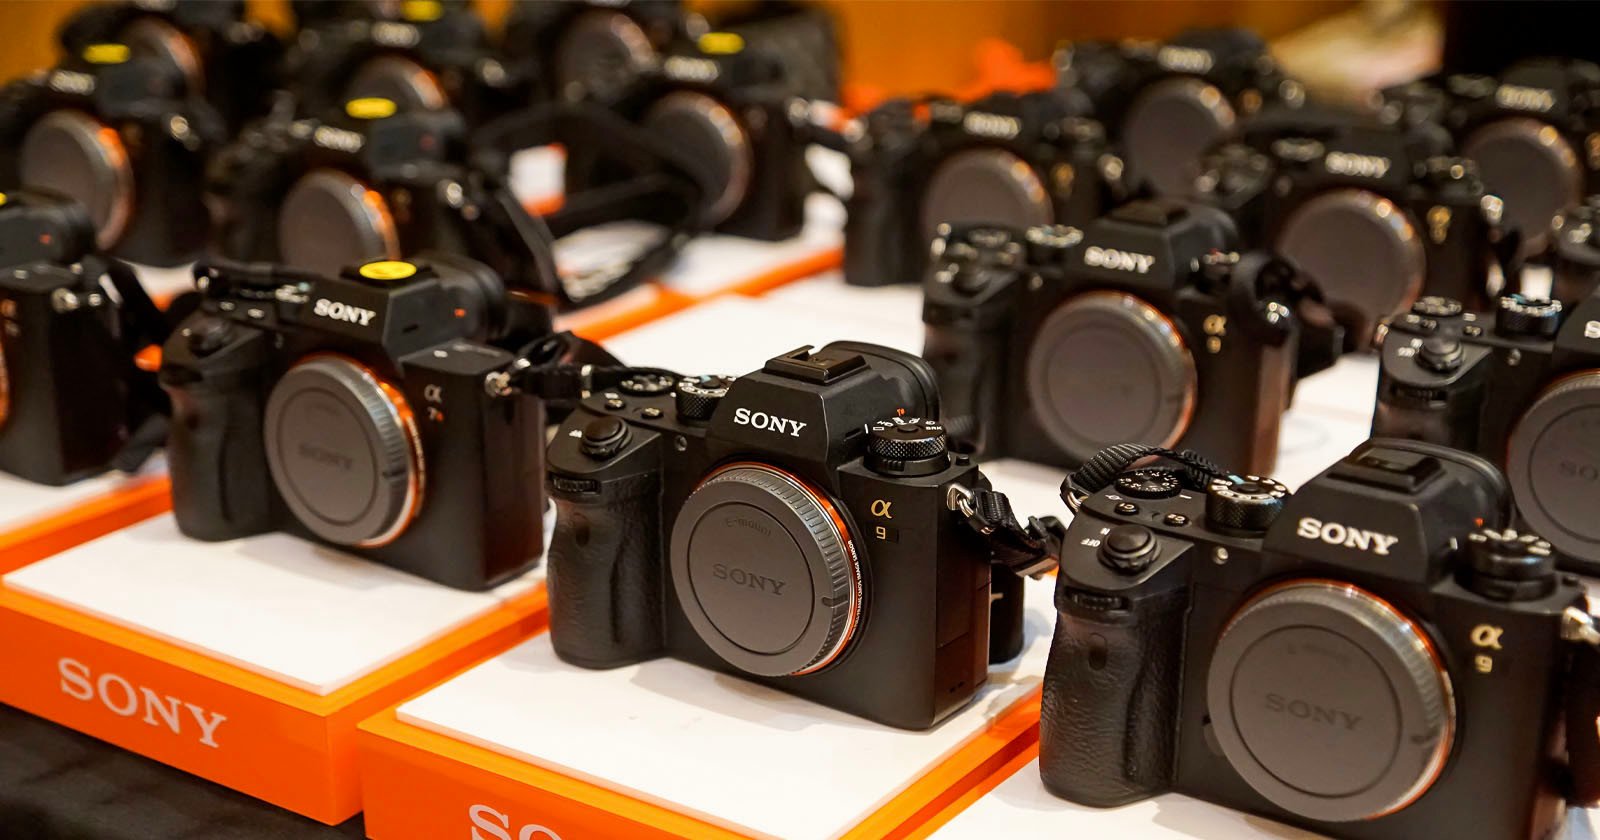 The Average Digital Camera Price Has Doubled Over the Past Three Years